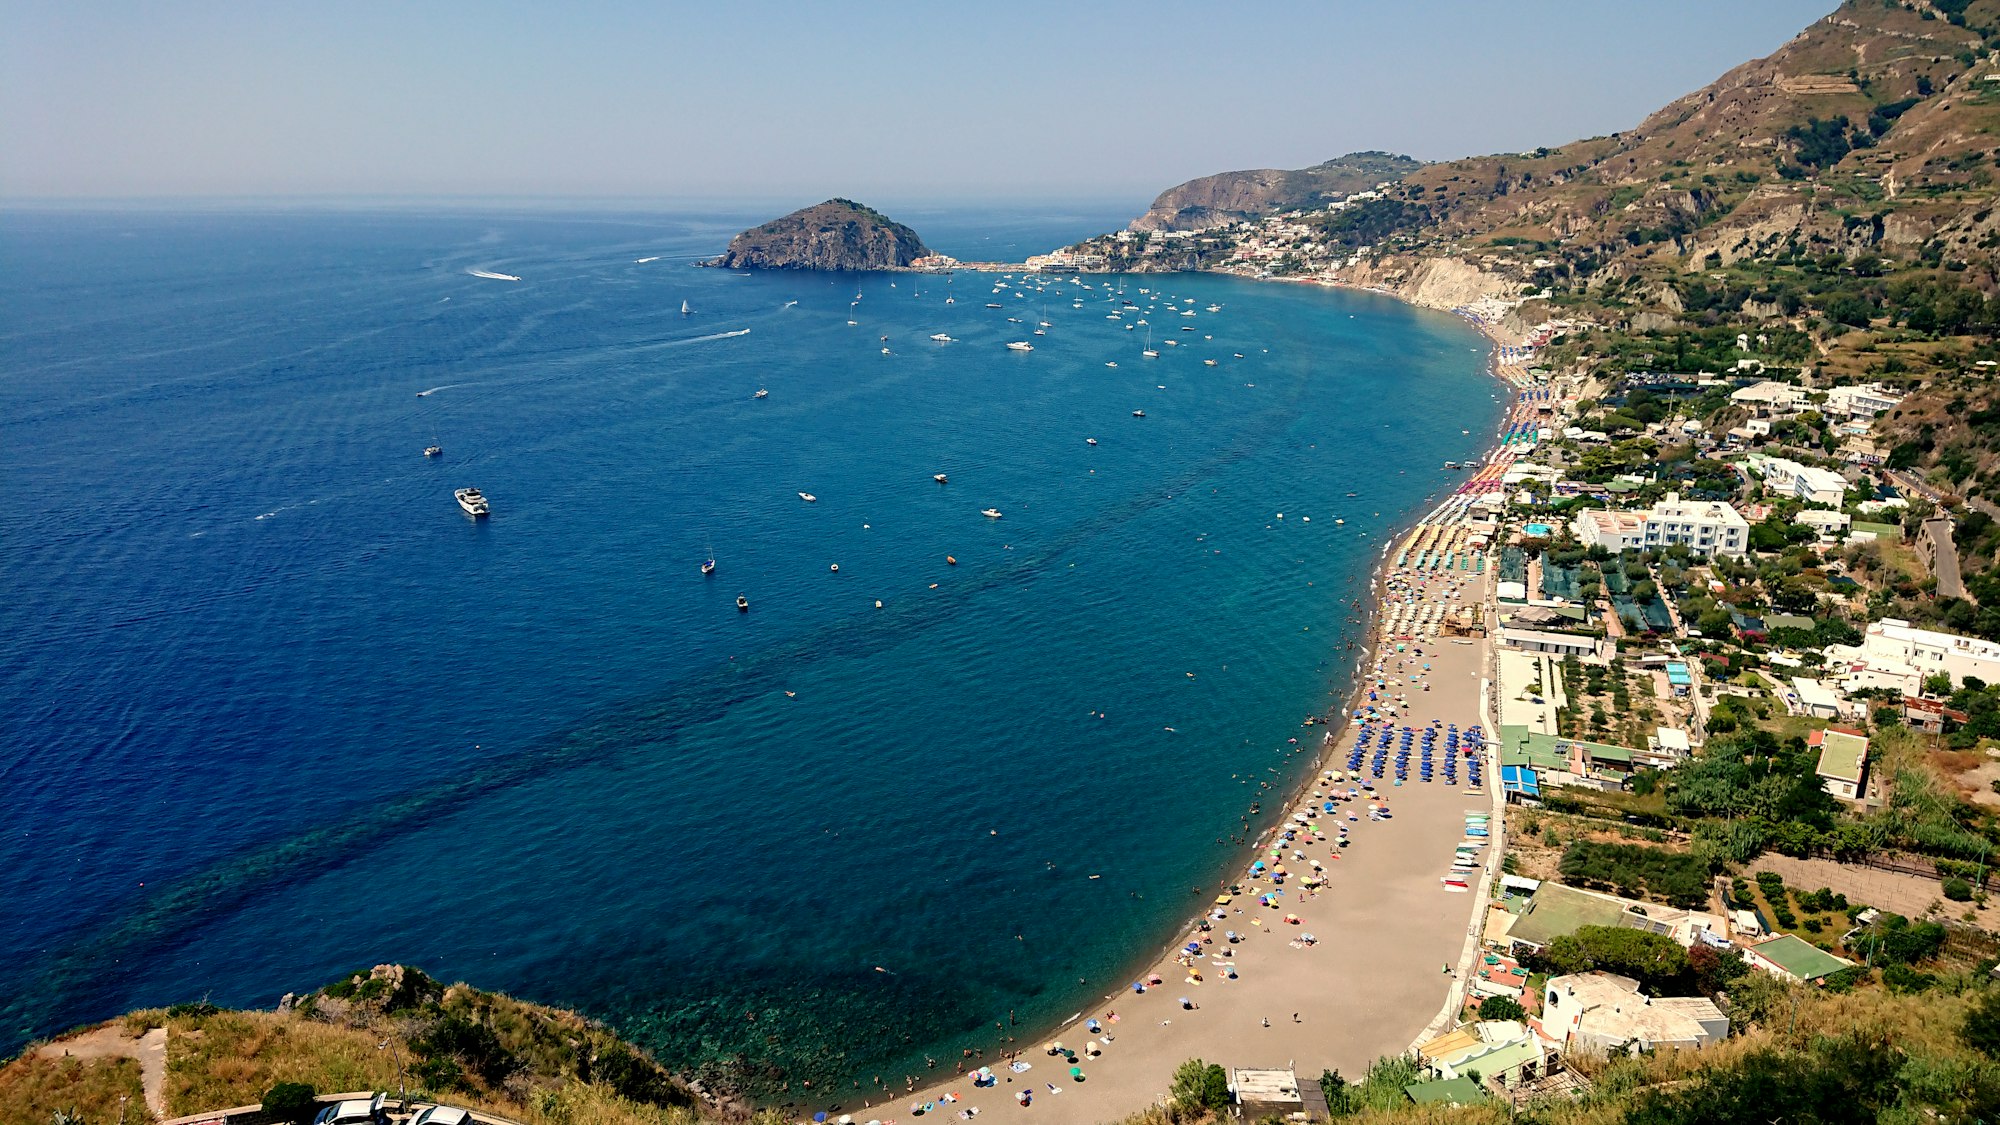 View of Maronti Beach at Ischia during summer.